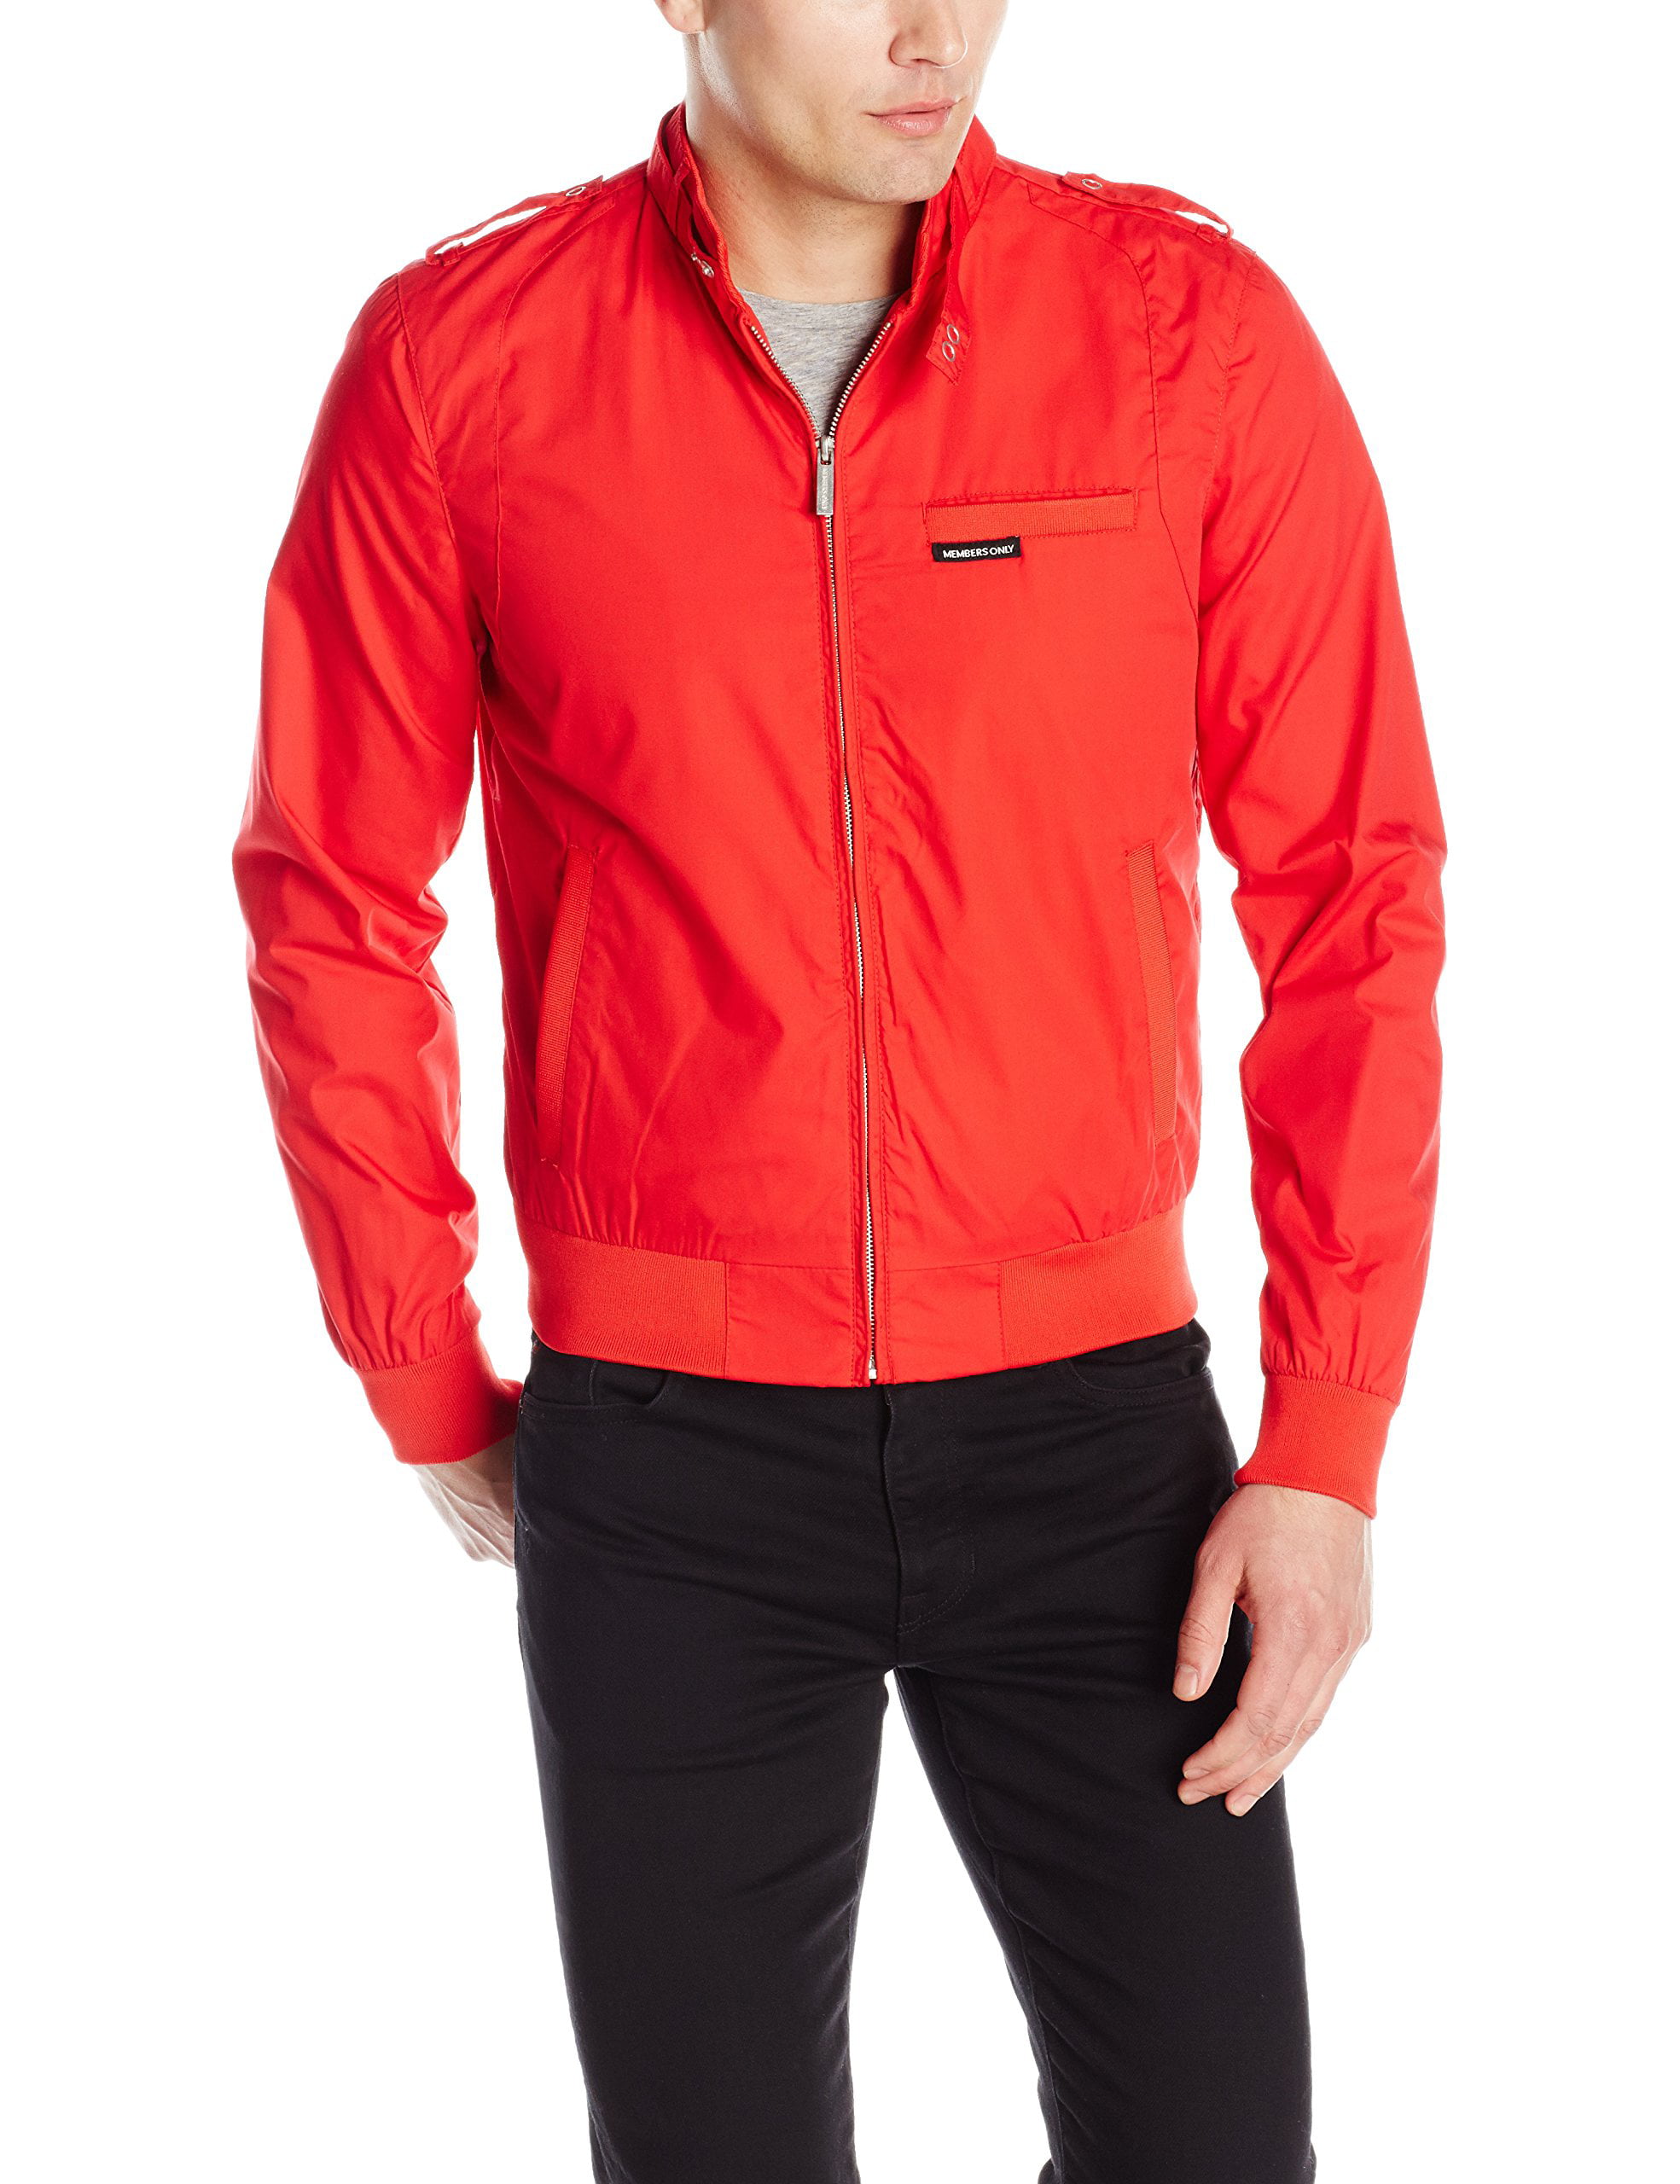 Members Only Women's Classic Iconic Racer Jacket - Red, XL - Walmart.com